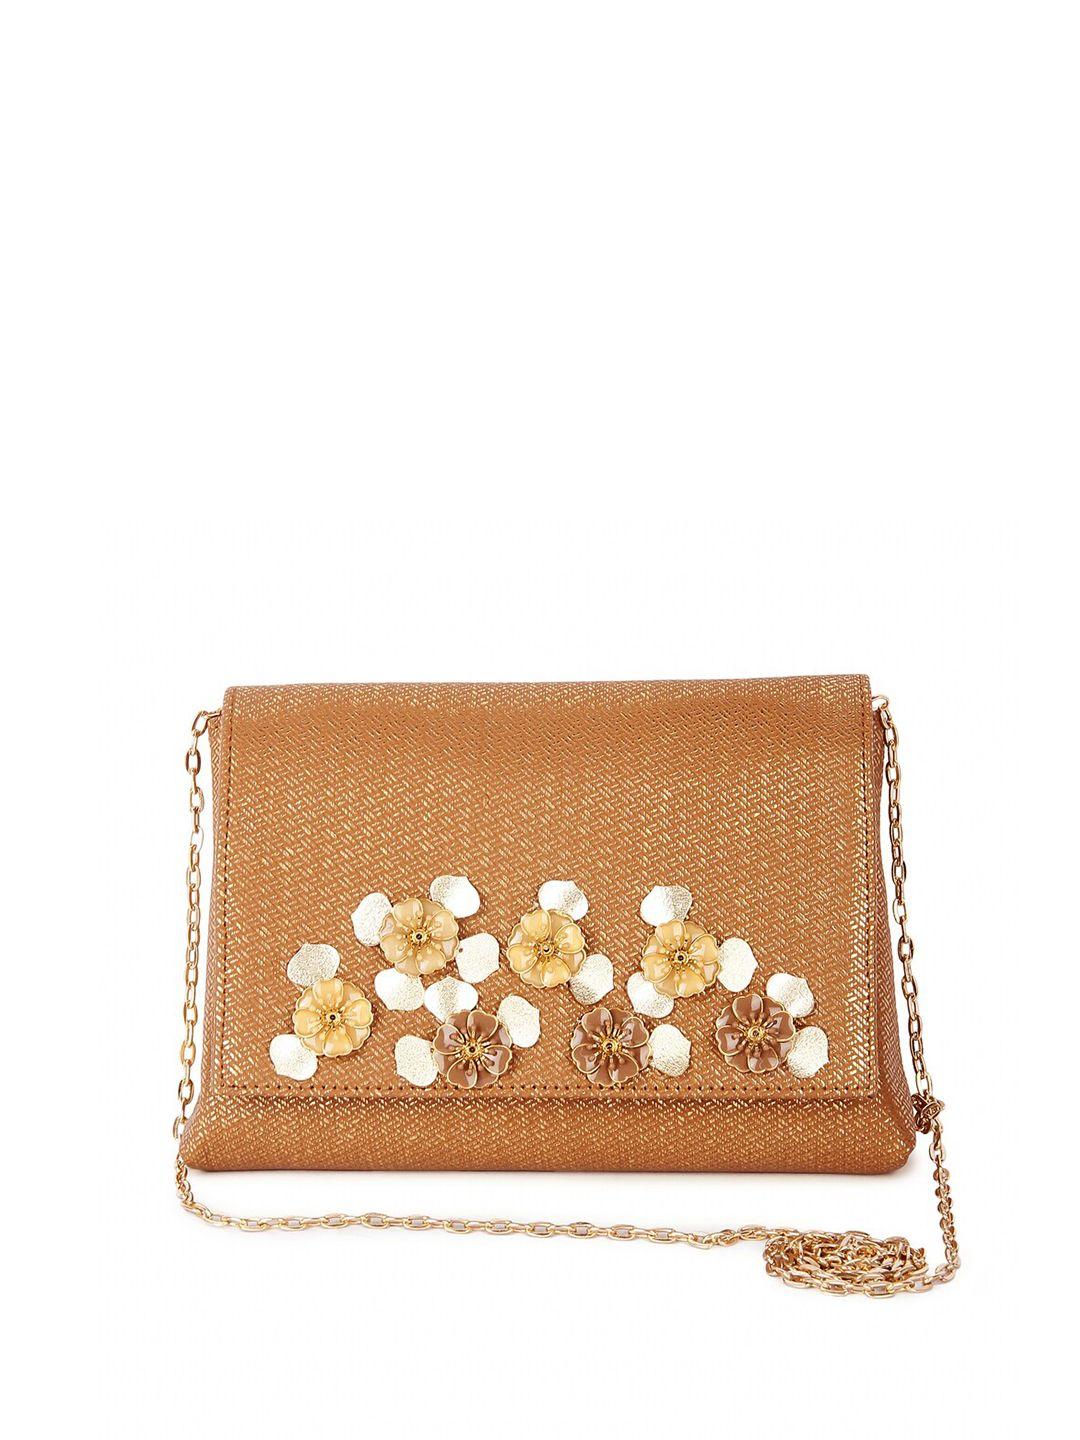 the-purple-sack-gold-embroidered-purse-clutch